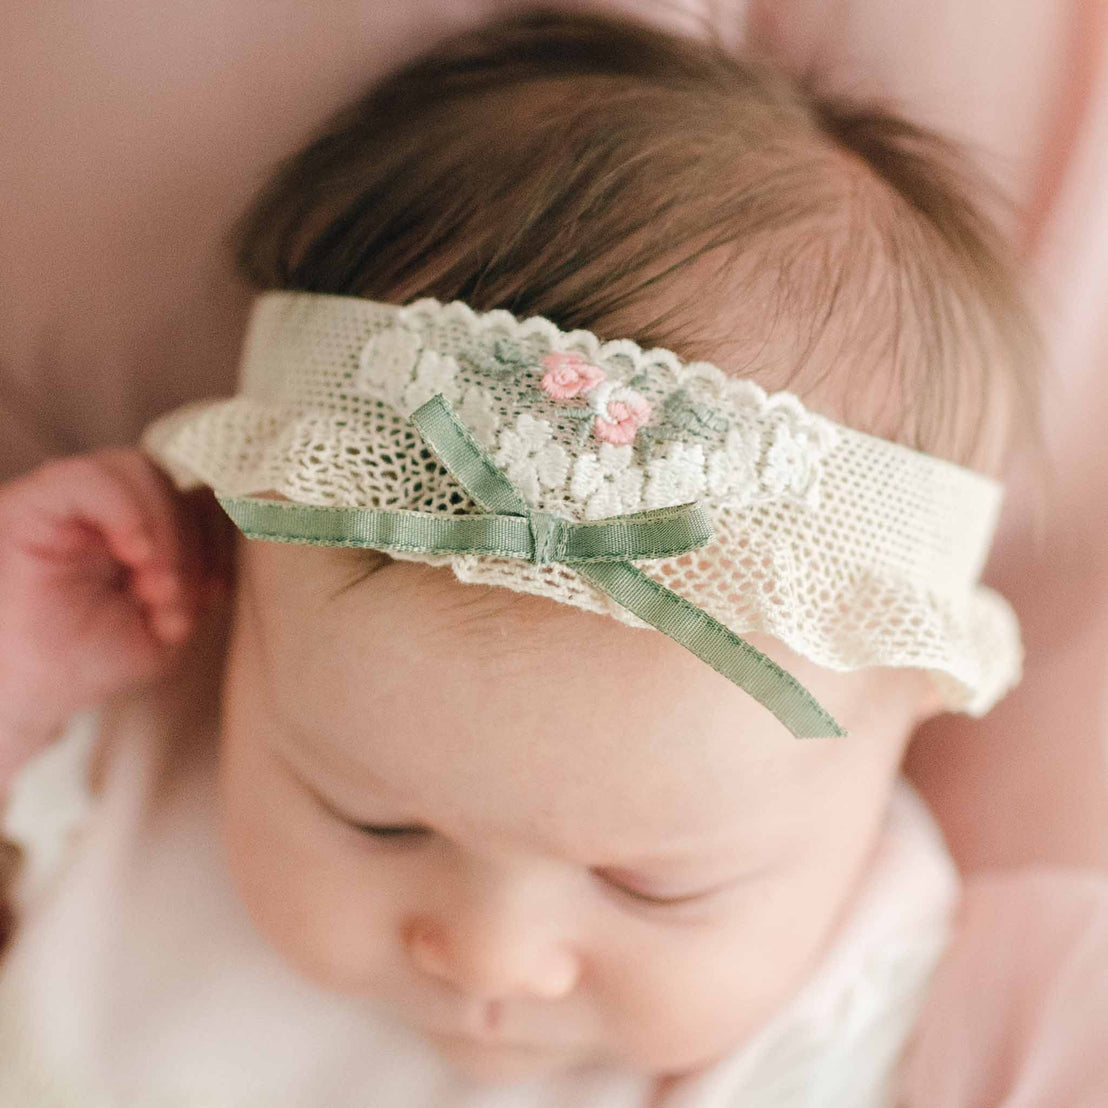 Baby girl wearing a Natalie Headband made from cotton netting with a vintage natural cotton lace, pink rosettes, olive green leaves, and a green ribbon tie 